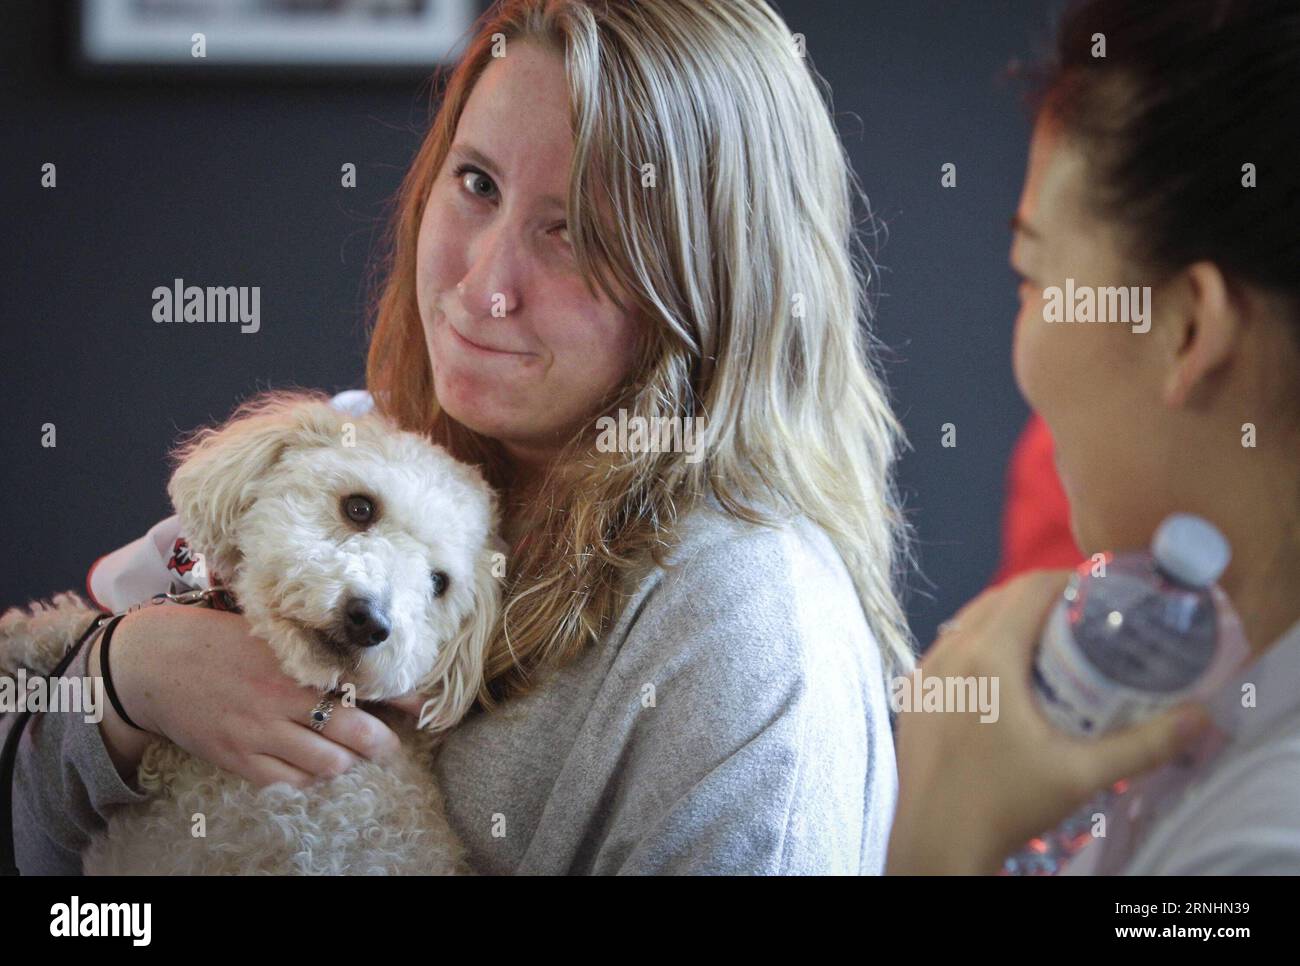 (161130) -- VANCOUVER, Nov. 30, 2016 -- A student hugs a dog during the puppy therapy event at Simon Fraser University in Vancouver, Canada, Nov. 29, 2016. Simon Fraser University invited puppies to campus during exam time to help students take a break from the stress of end-of-term assignments. )(gj) CANADA-VANCOUVER-PUPPY THERAPY LiangxSen PUBLICATIONxNOTxINxCHN   Vancouver Nov 30 2016 a Student Hugs a Dog during The Puppy THERAPY Event AT Simon Fraser University in Vancouver Canada Nov 29 2016 Simon Fraser University invited Puppies to Campus during Exam Time to Help Students Take a Break f Stock Photo